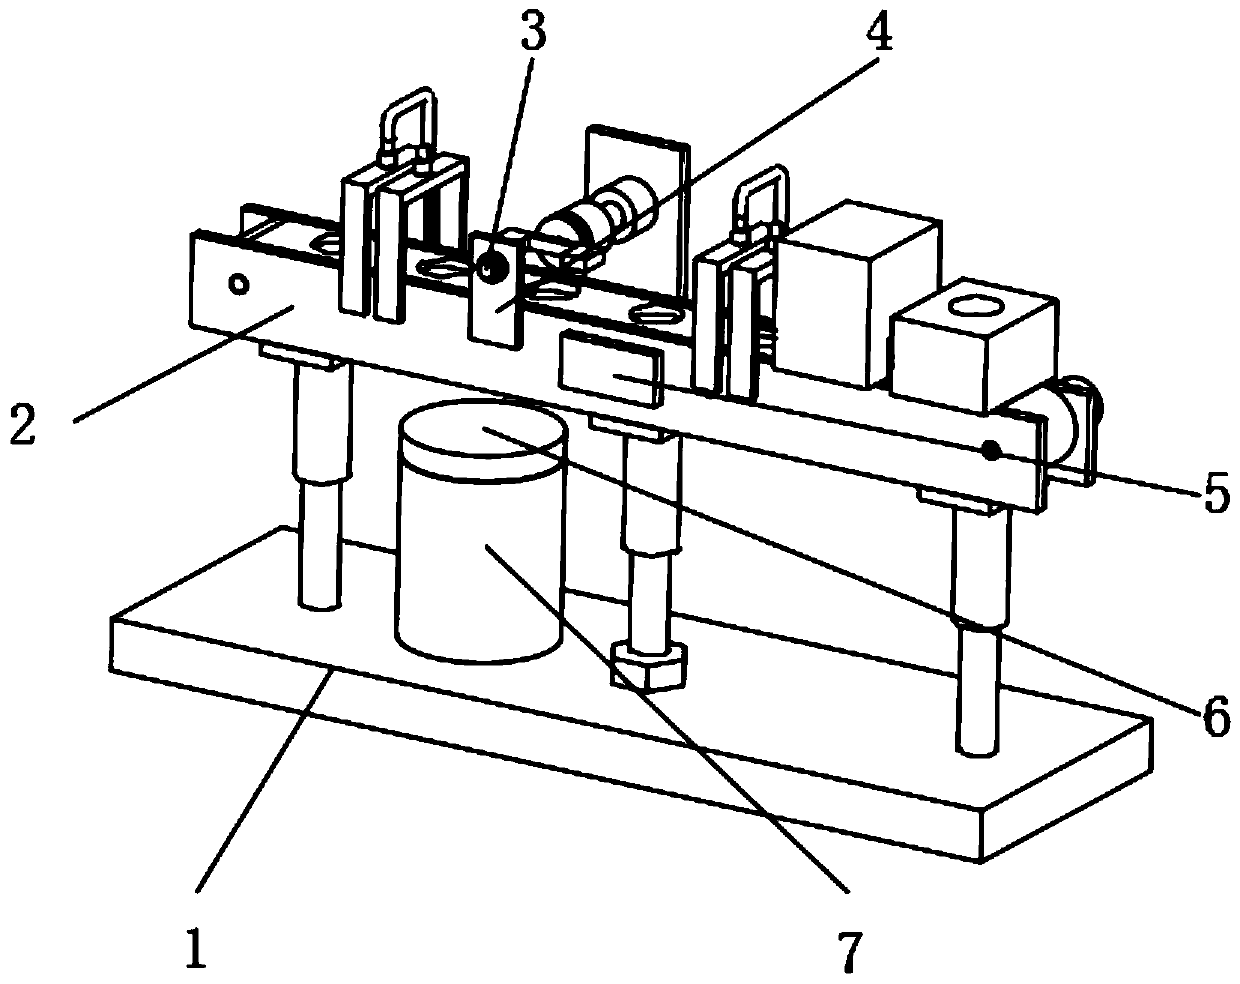 Code spraying printer for plastic packaging box and capable of facilitating ink adding